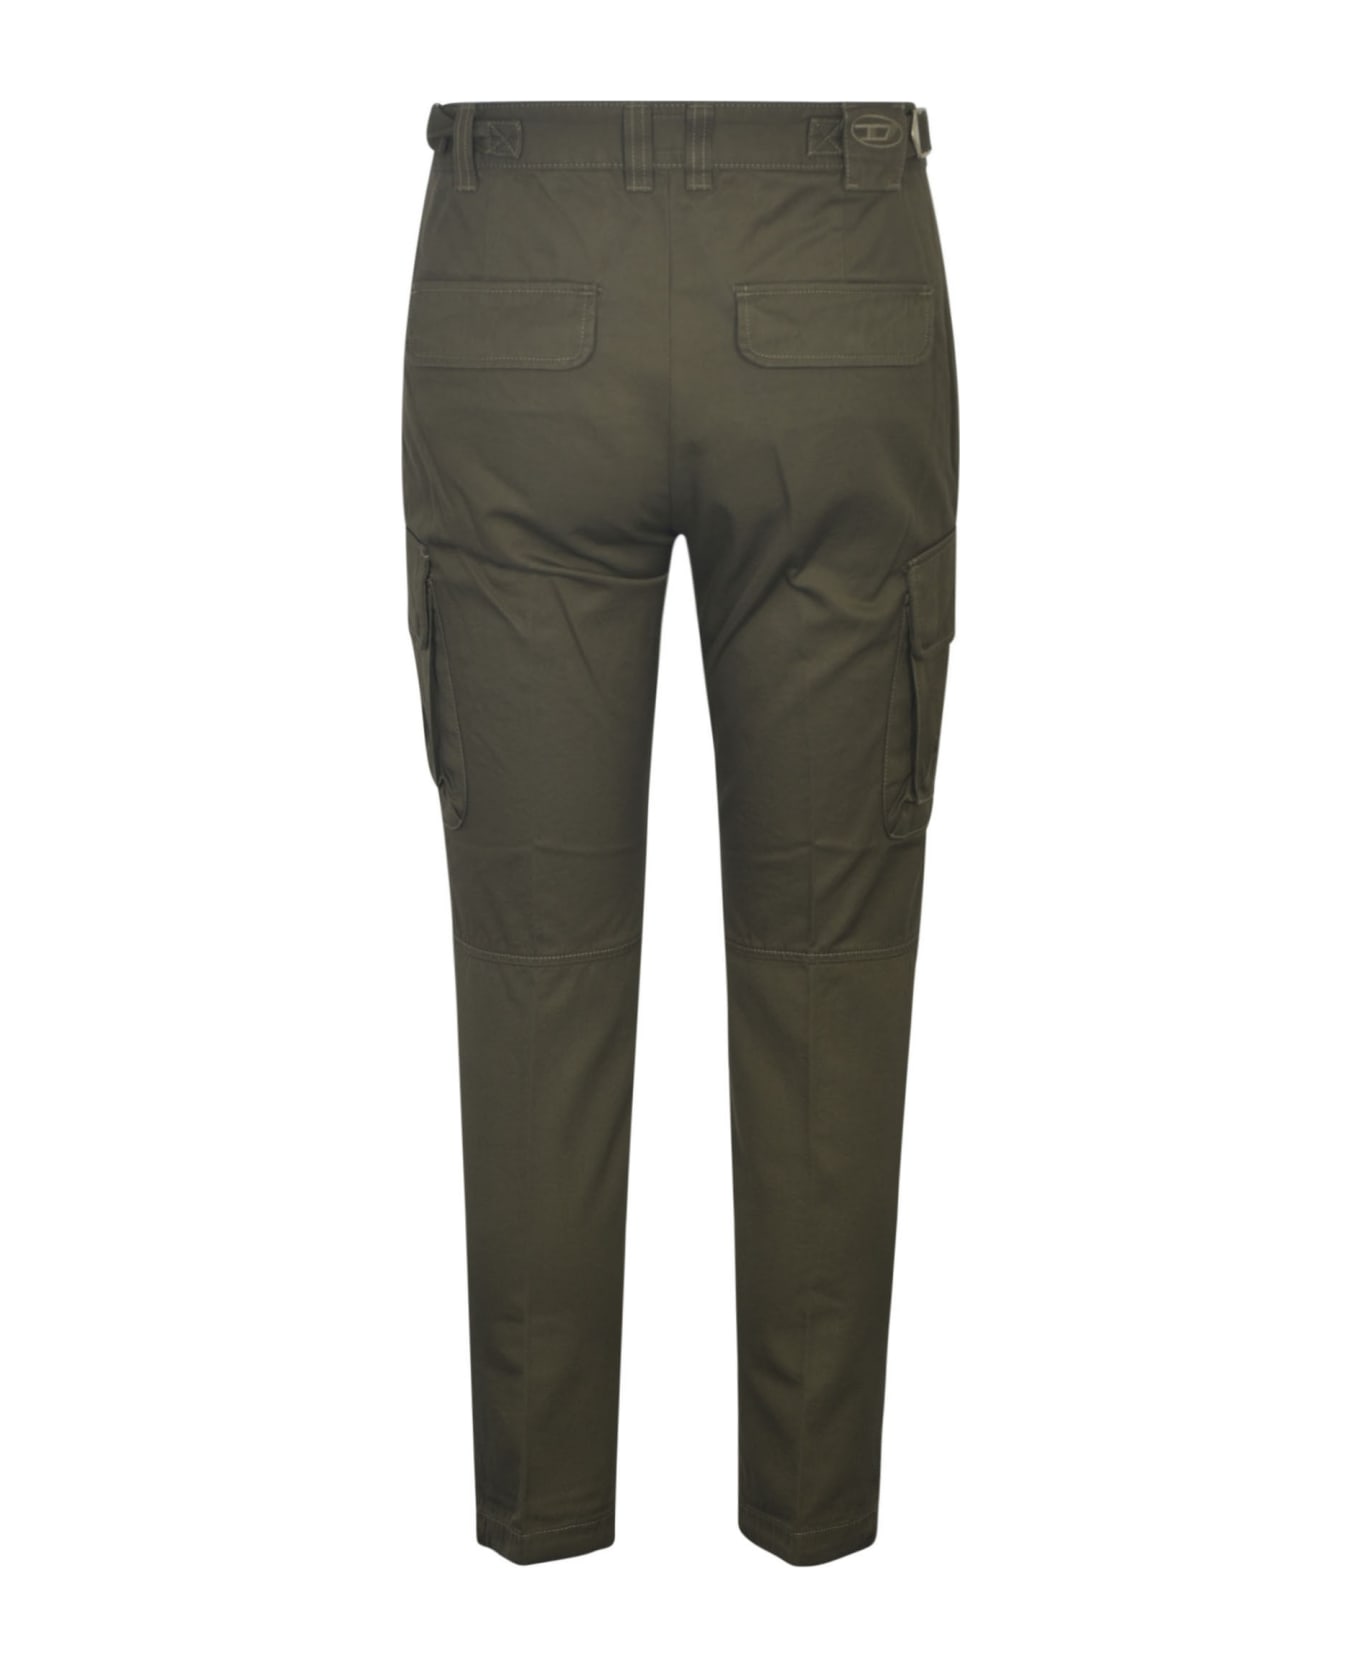 Diesel Cargo Fitted Trousers - KHAKI